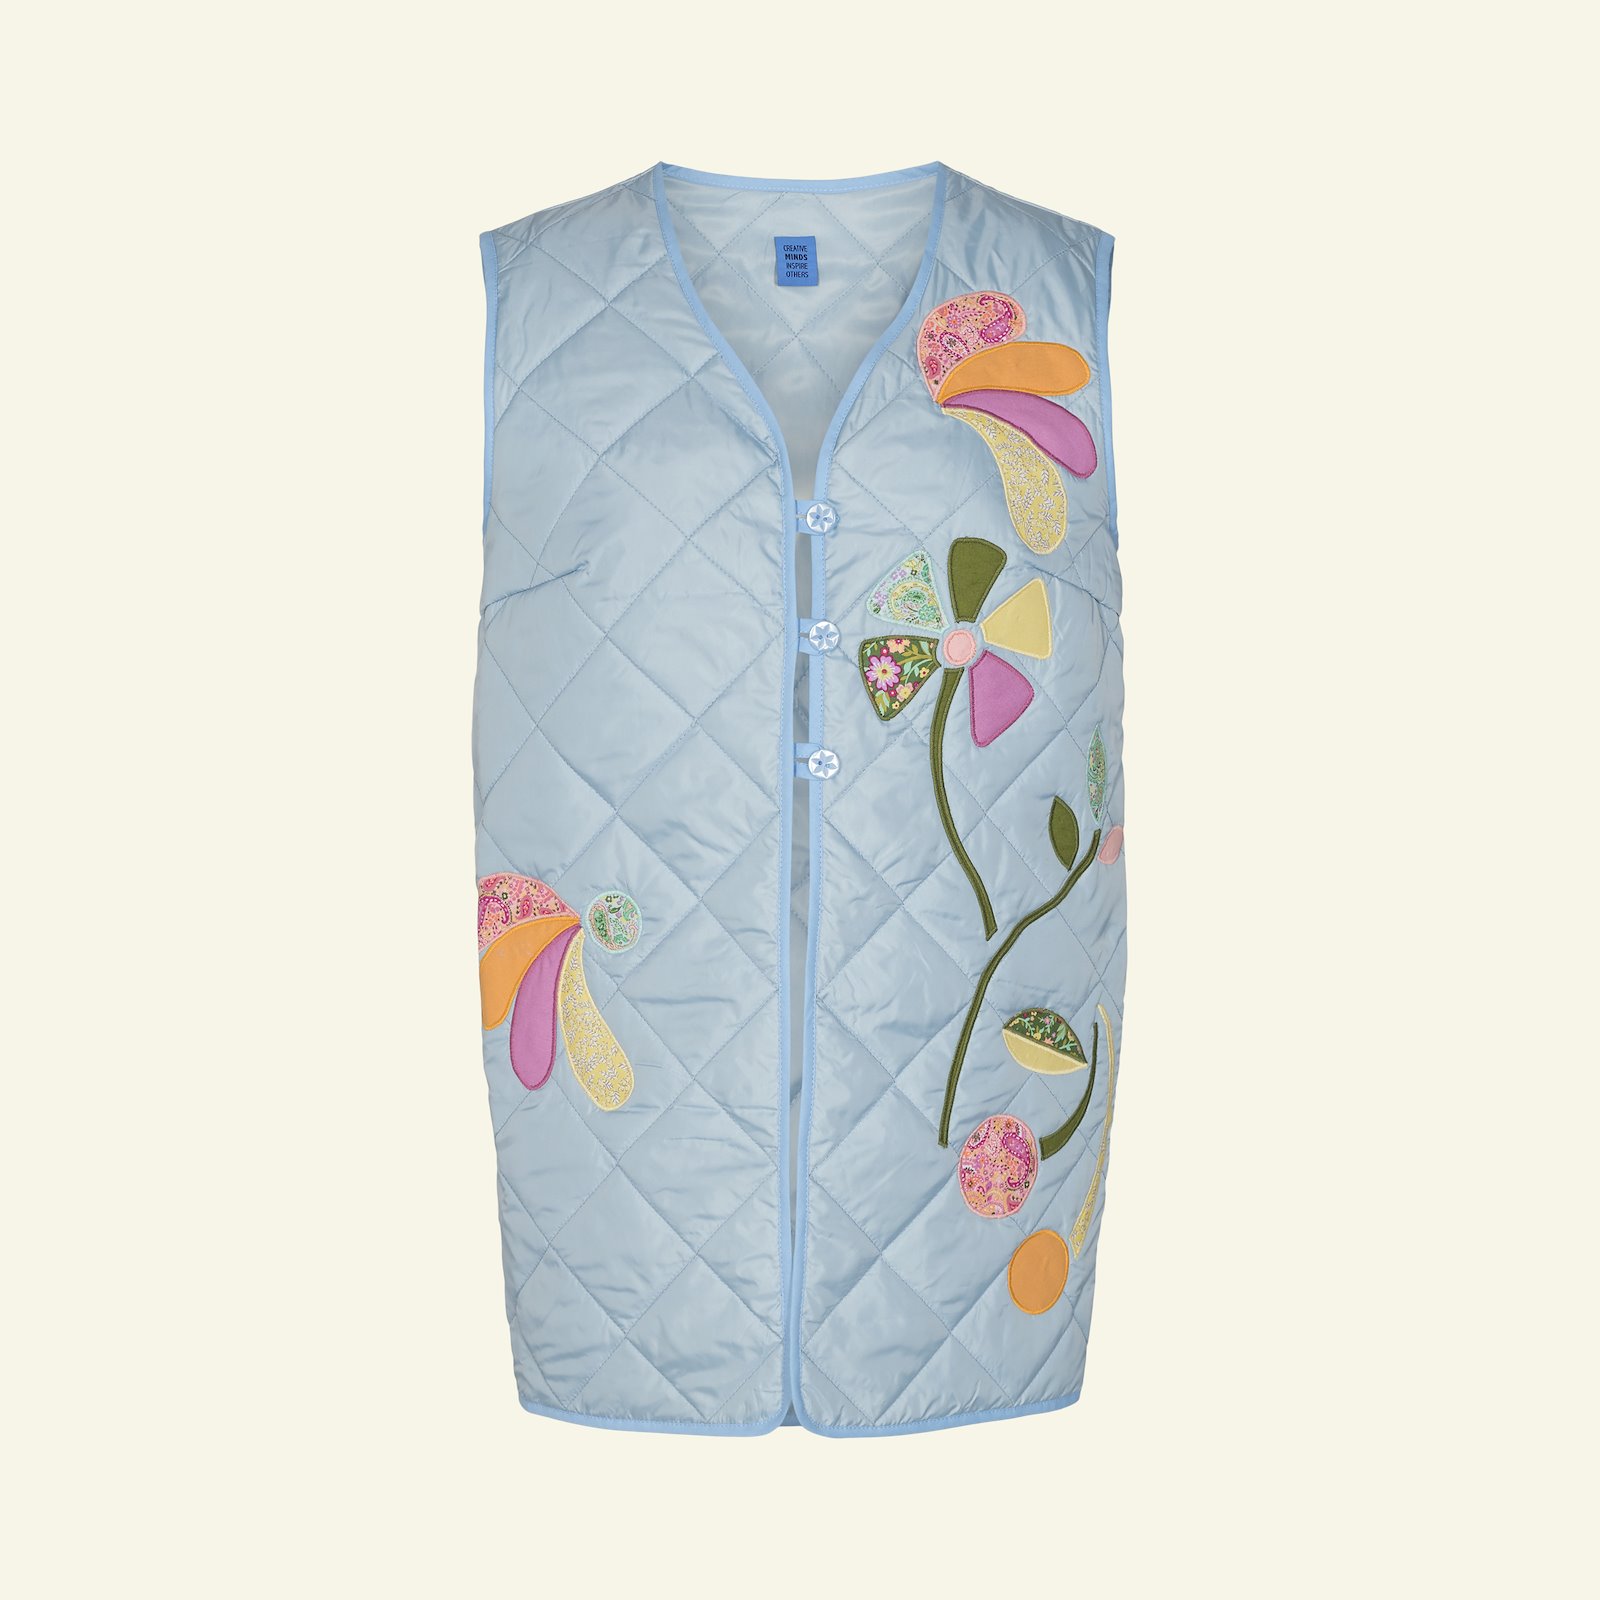 Quilted jacket and waistcoat, 36/8 p24047_920225_66019_33224_sskit